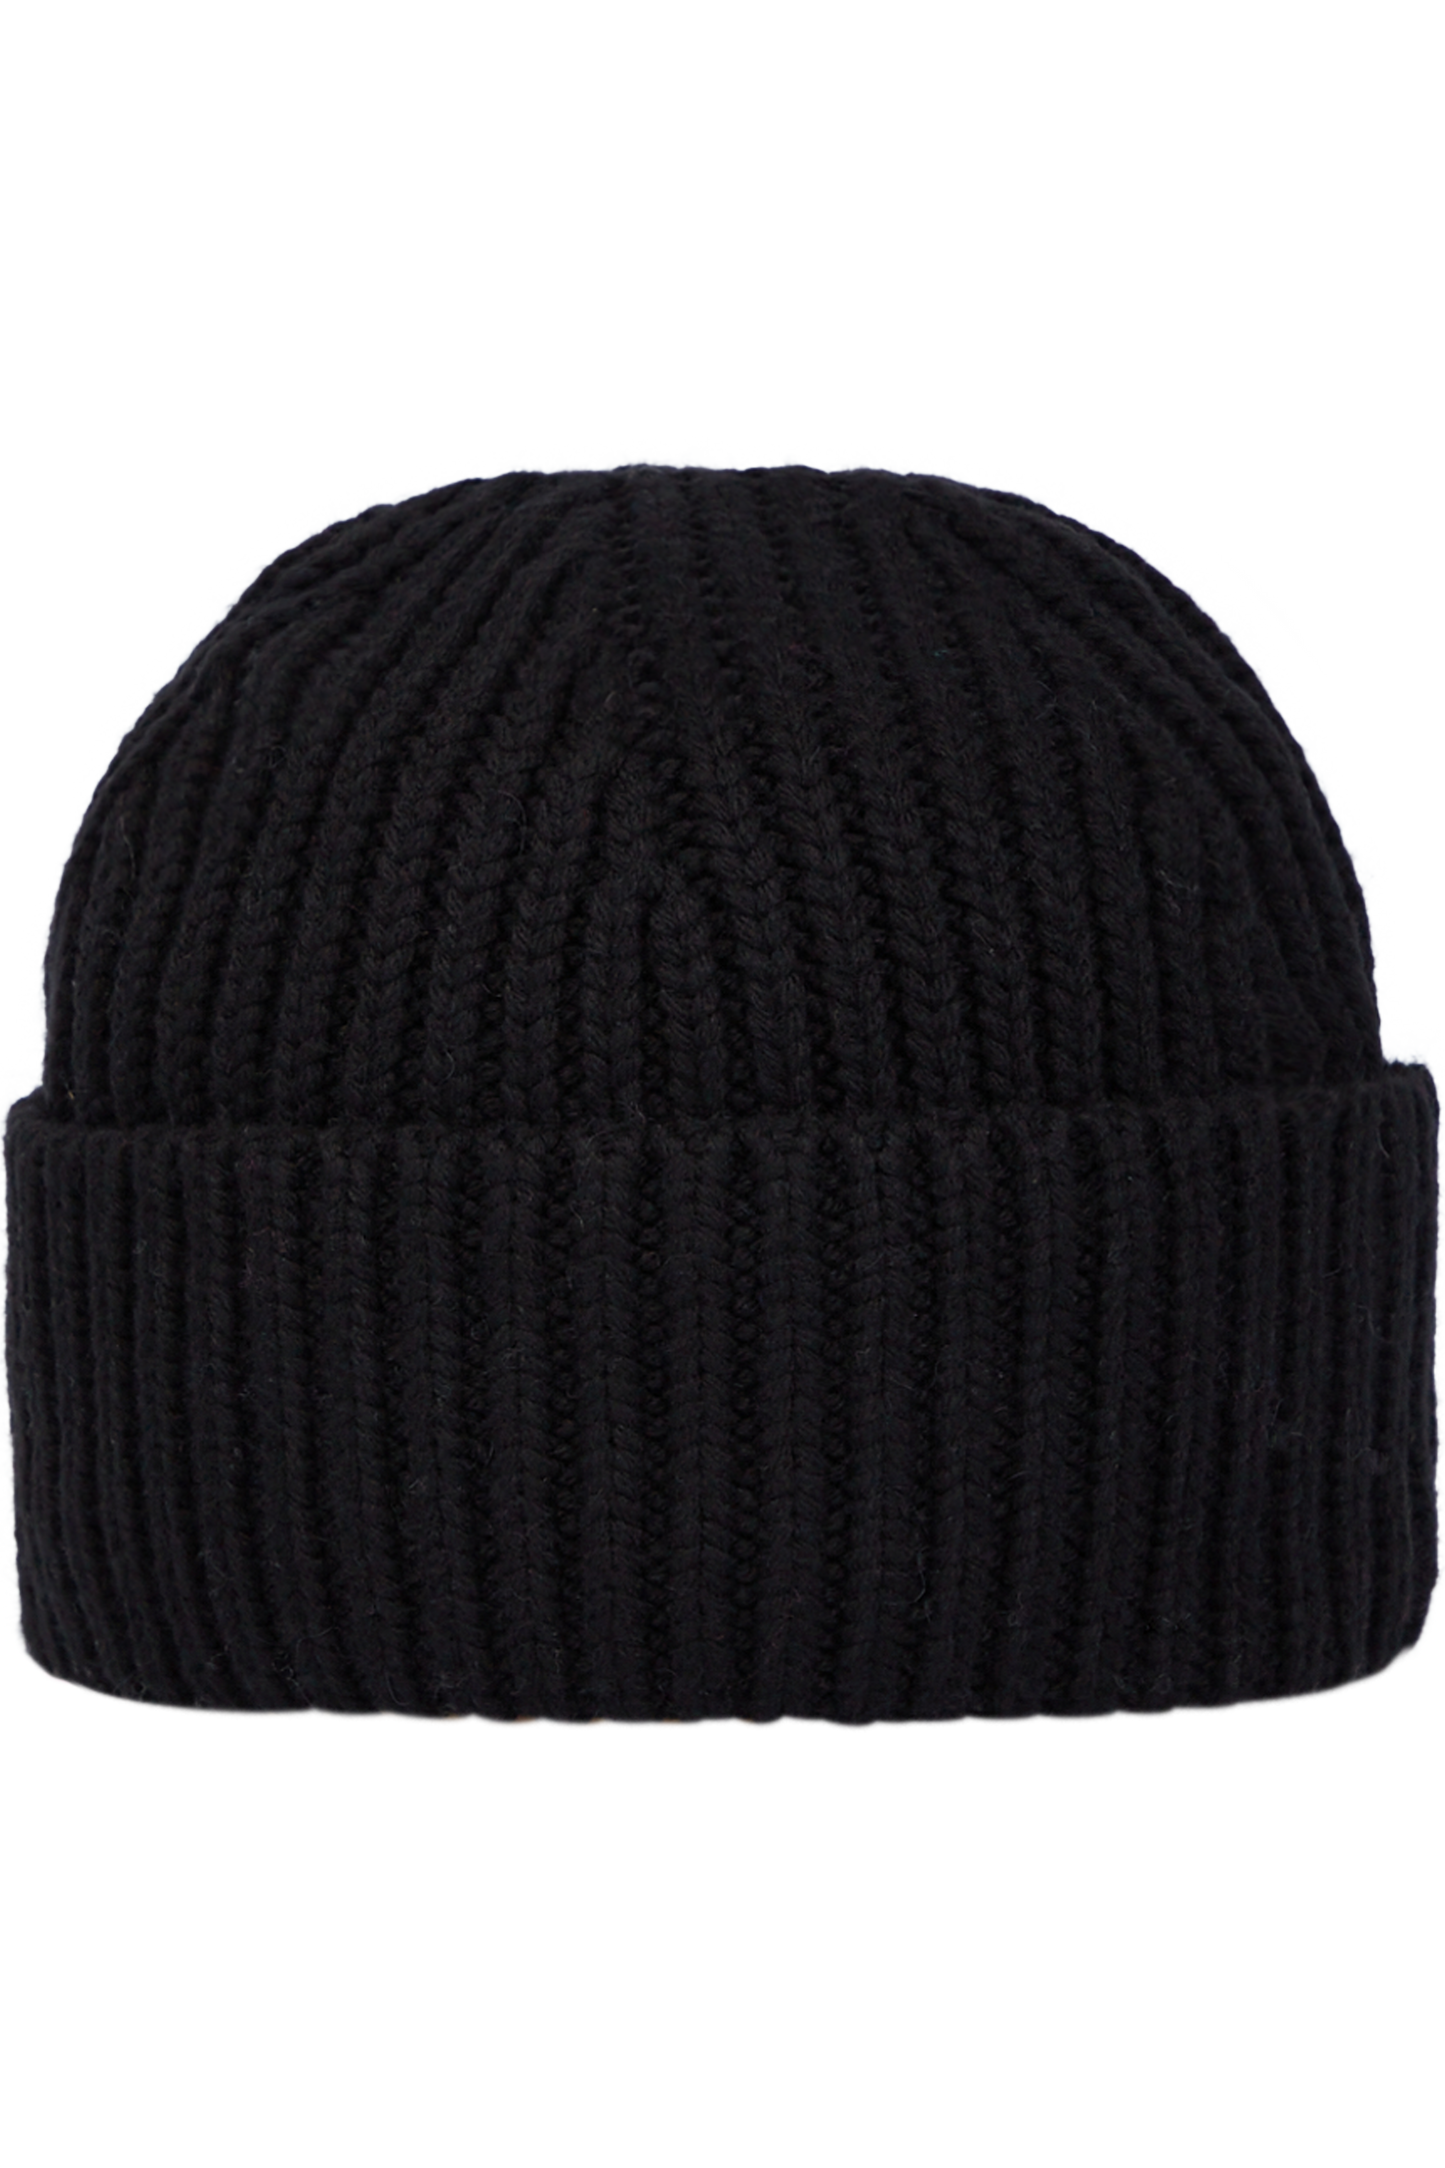 Coarse Knit Hat with Wide Folded Edge